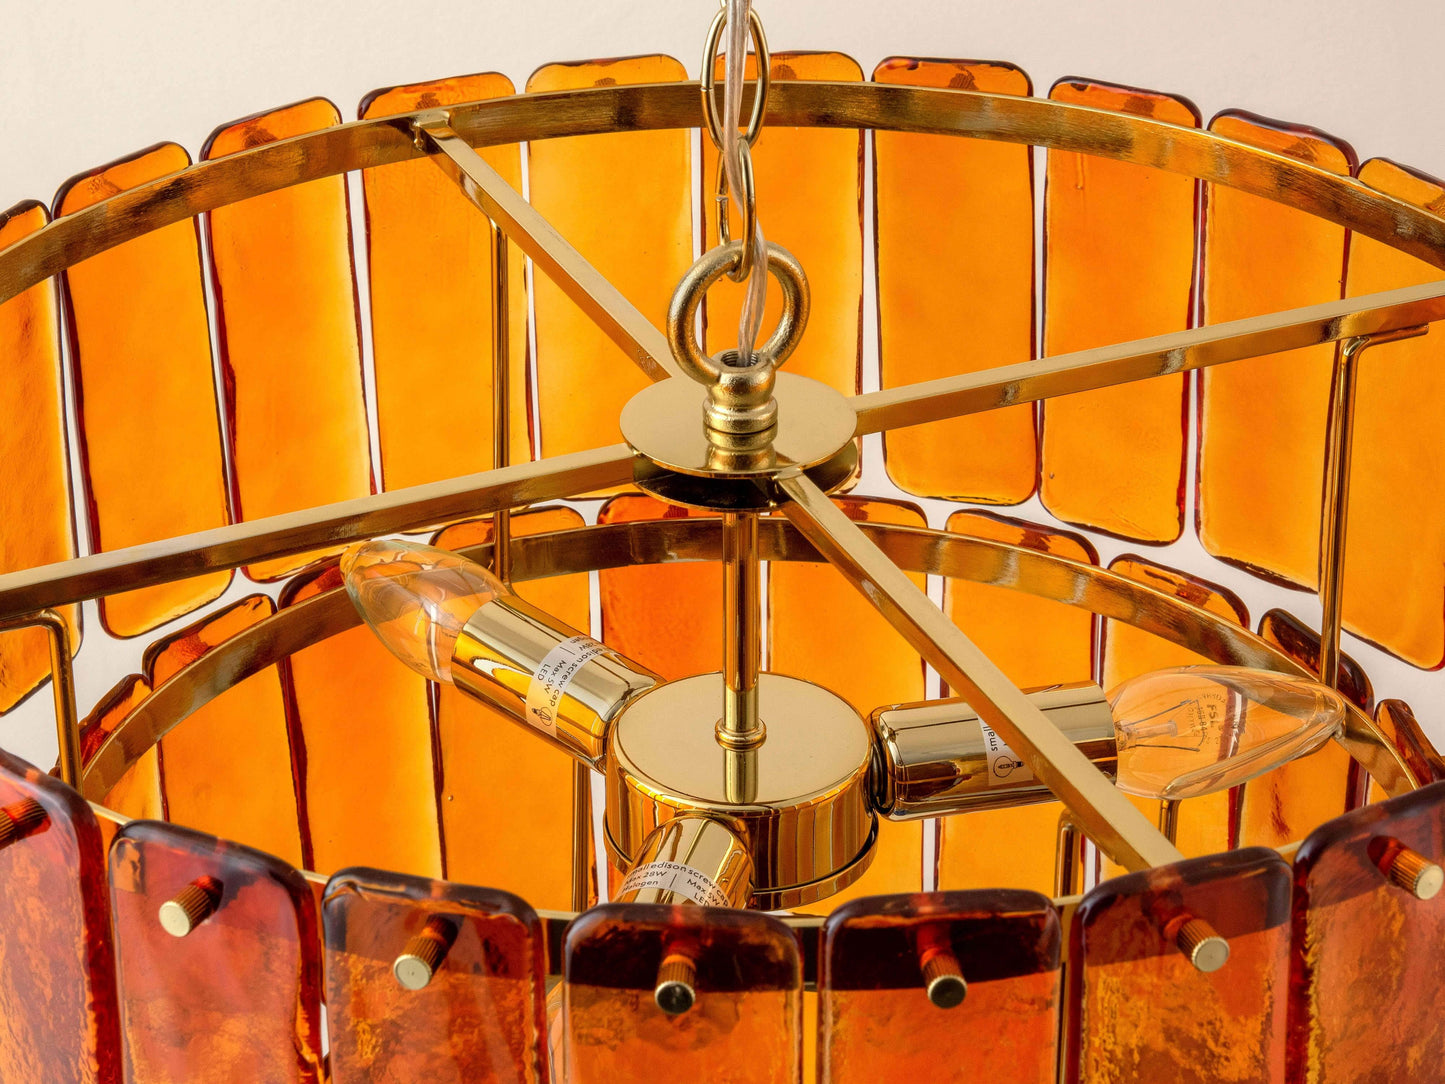 Amber Glass 3 Tiered Chandelier